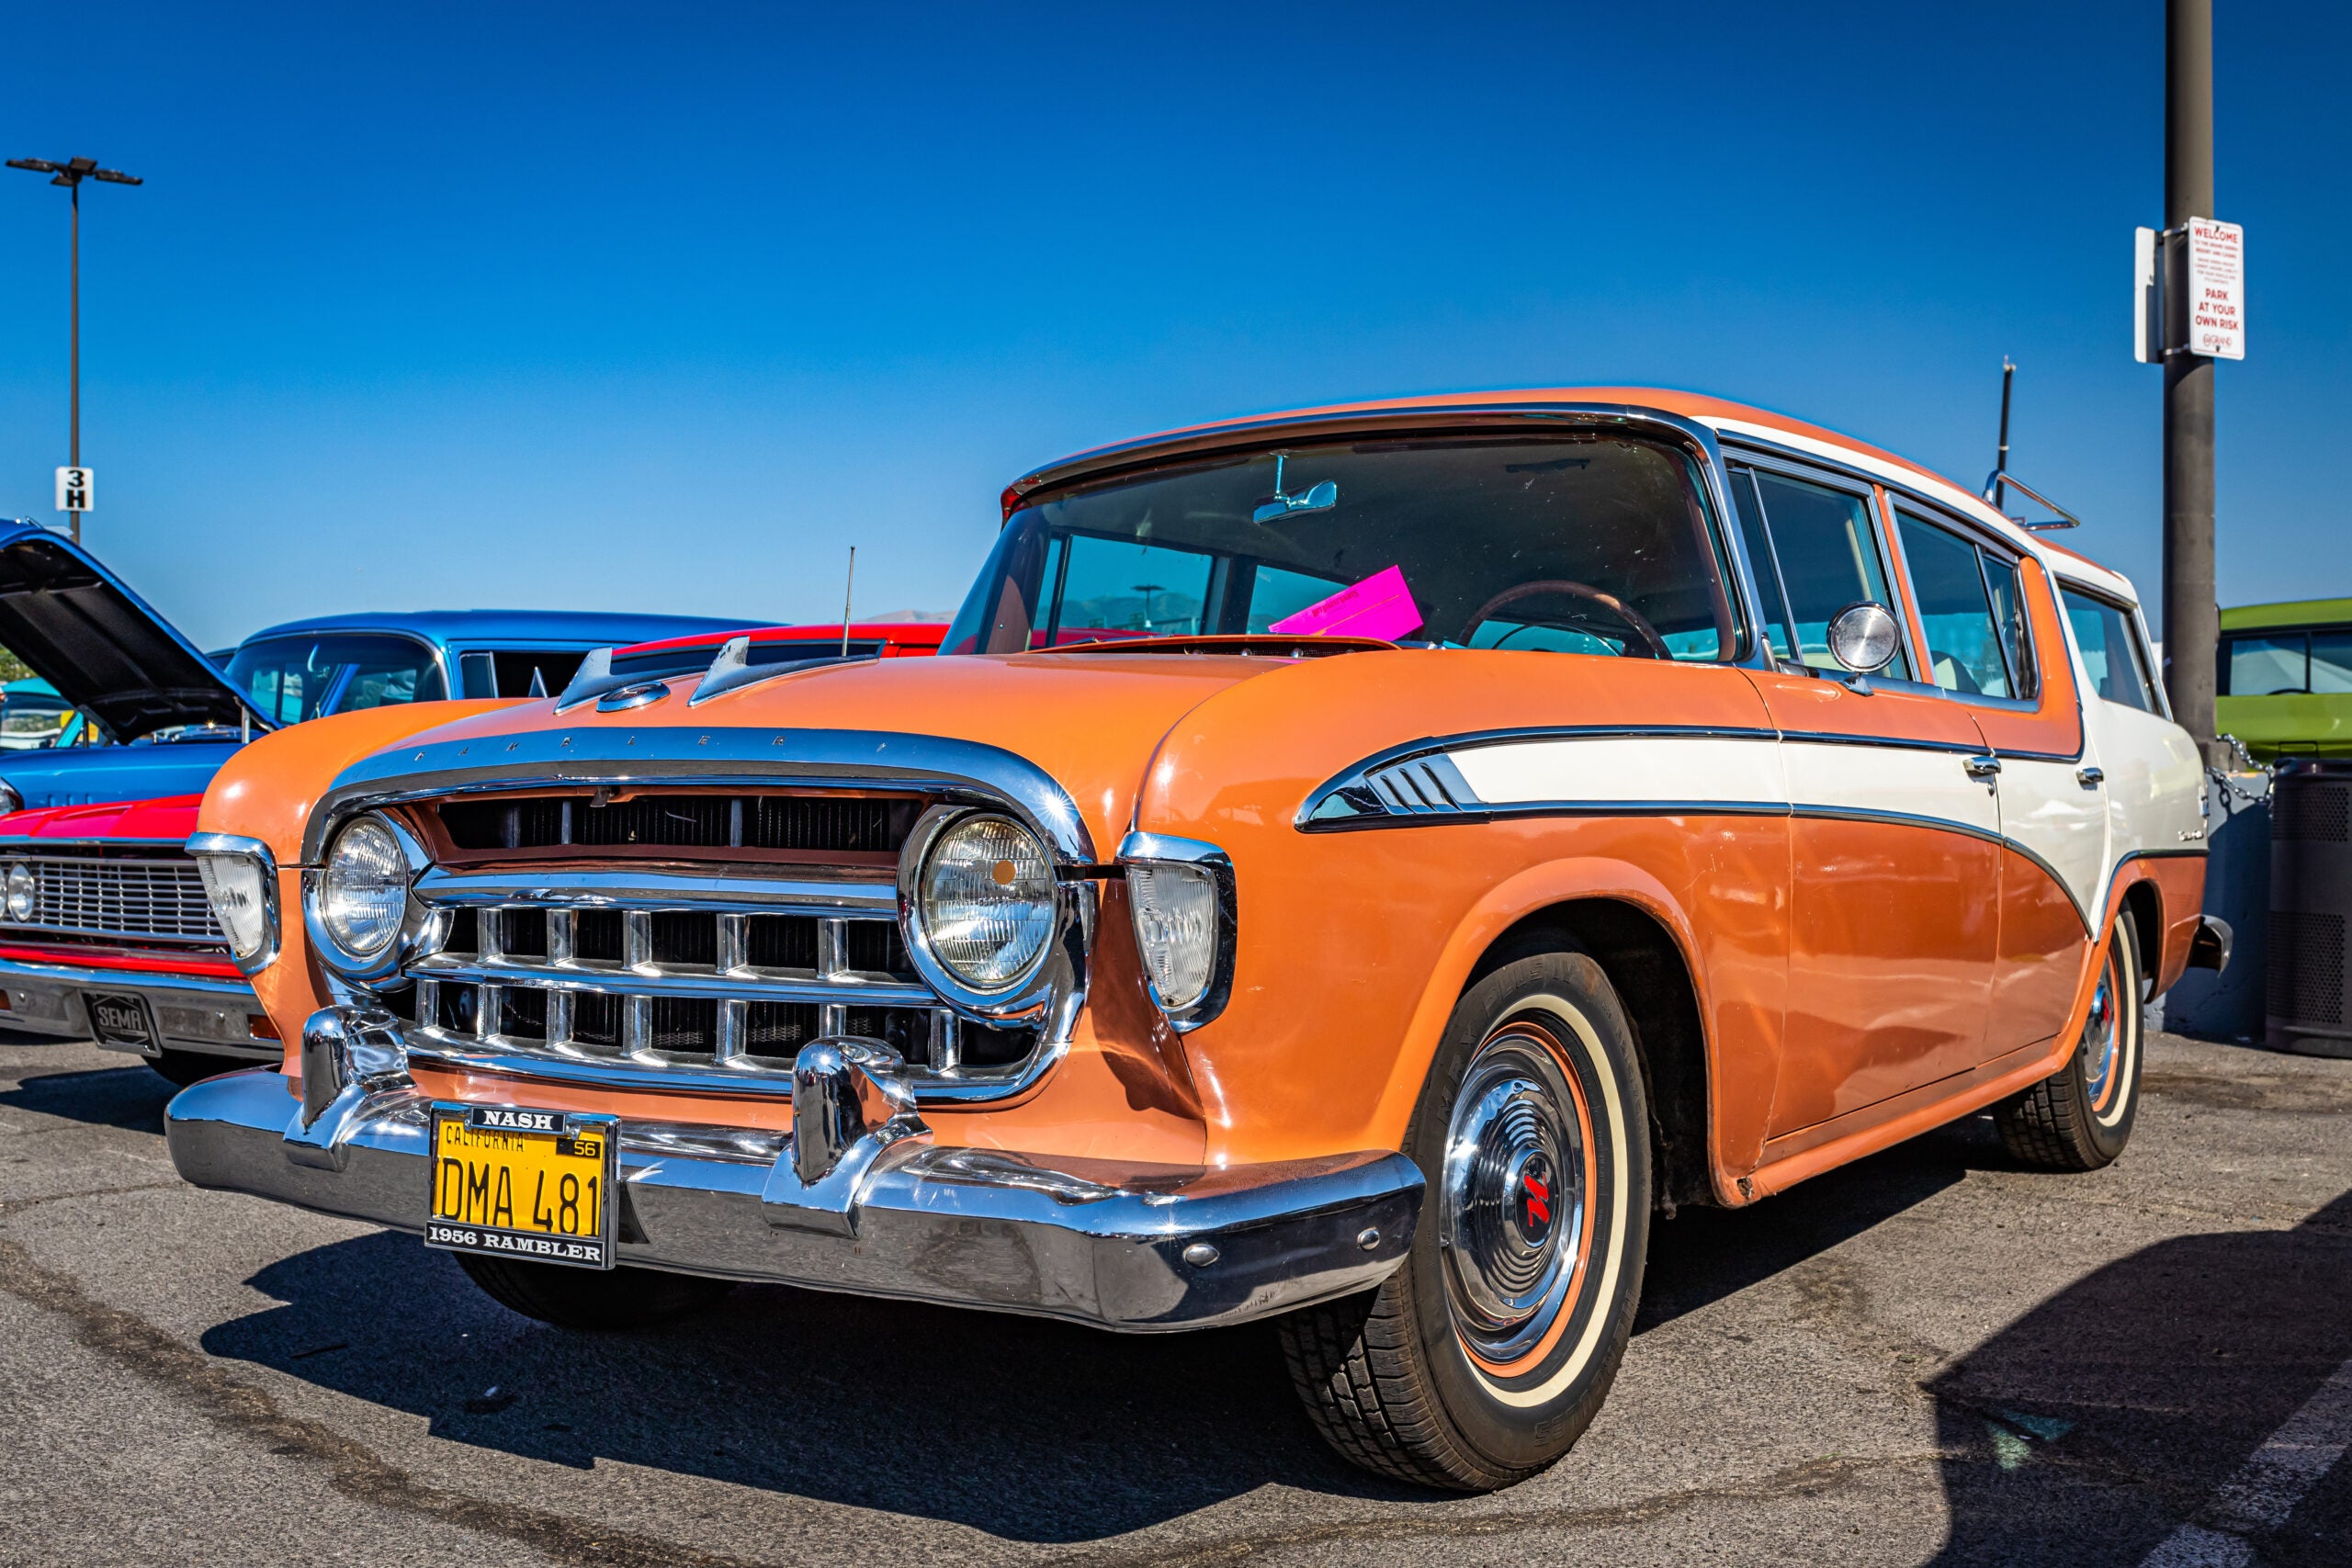 A orange and white Nash Rambler is parked in a lot.